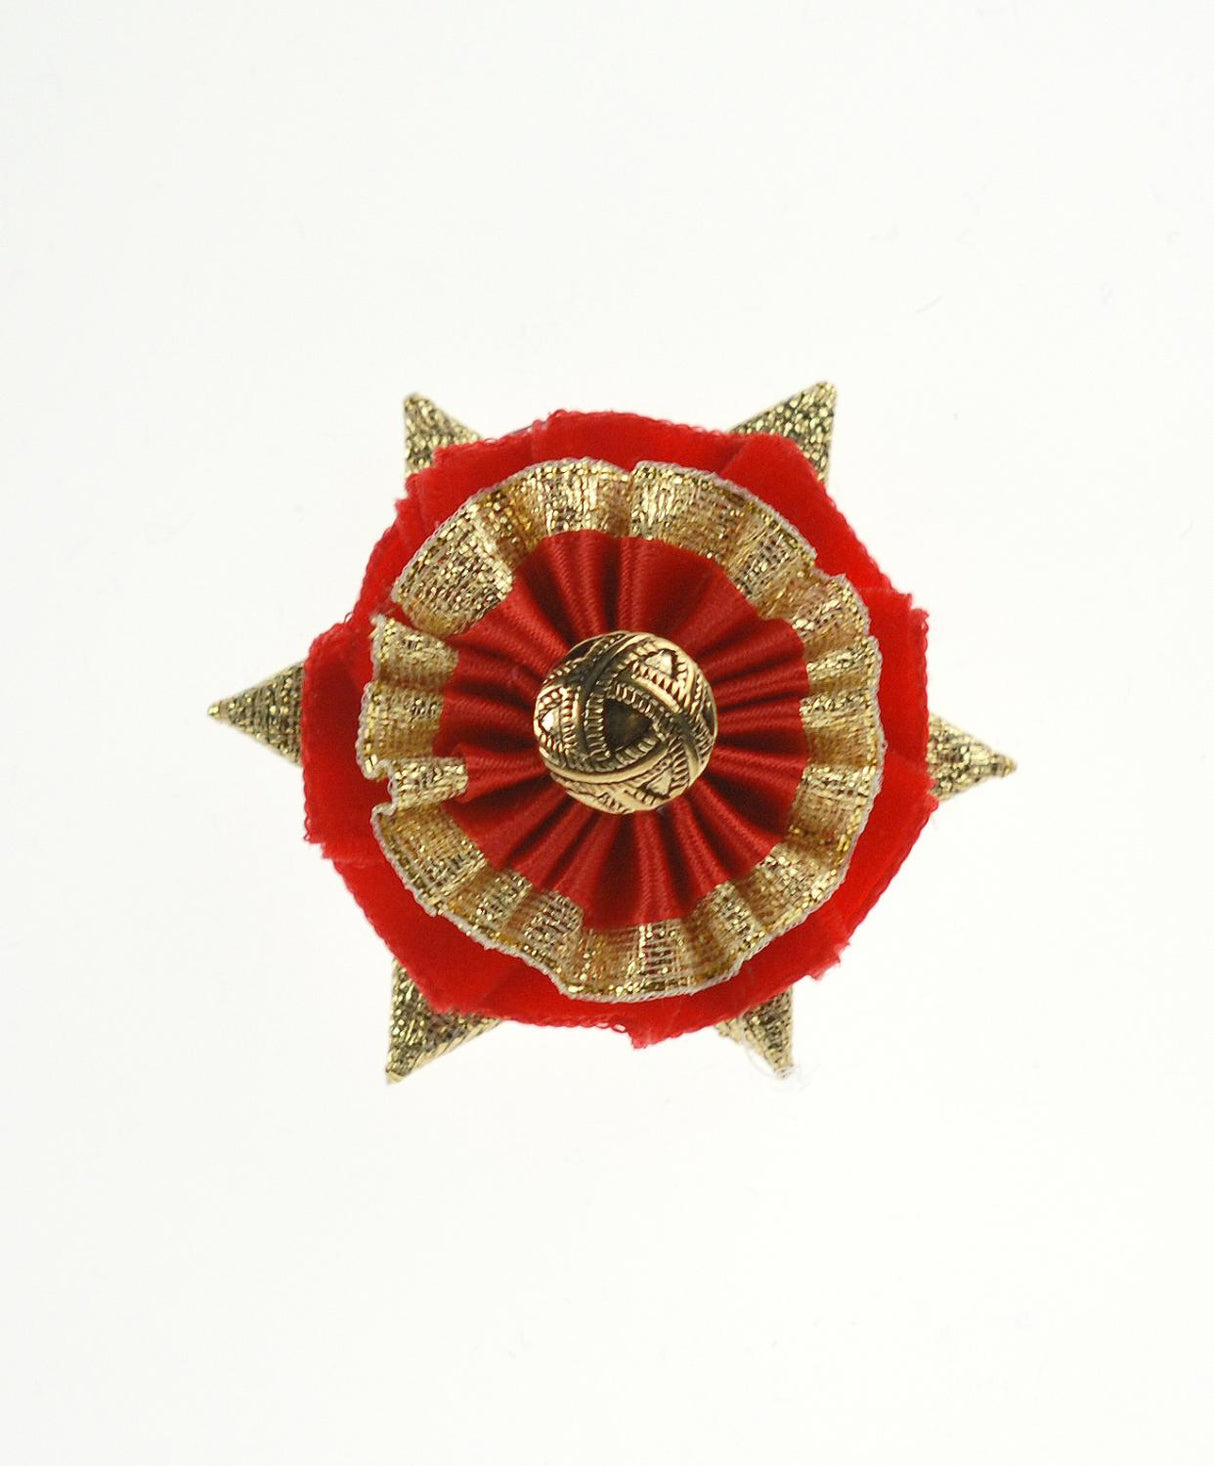 ShowQuest Boston/Ludlow Buttonhole #colour_red-red-gold